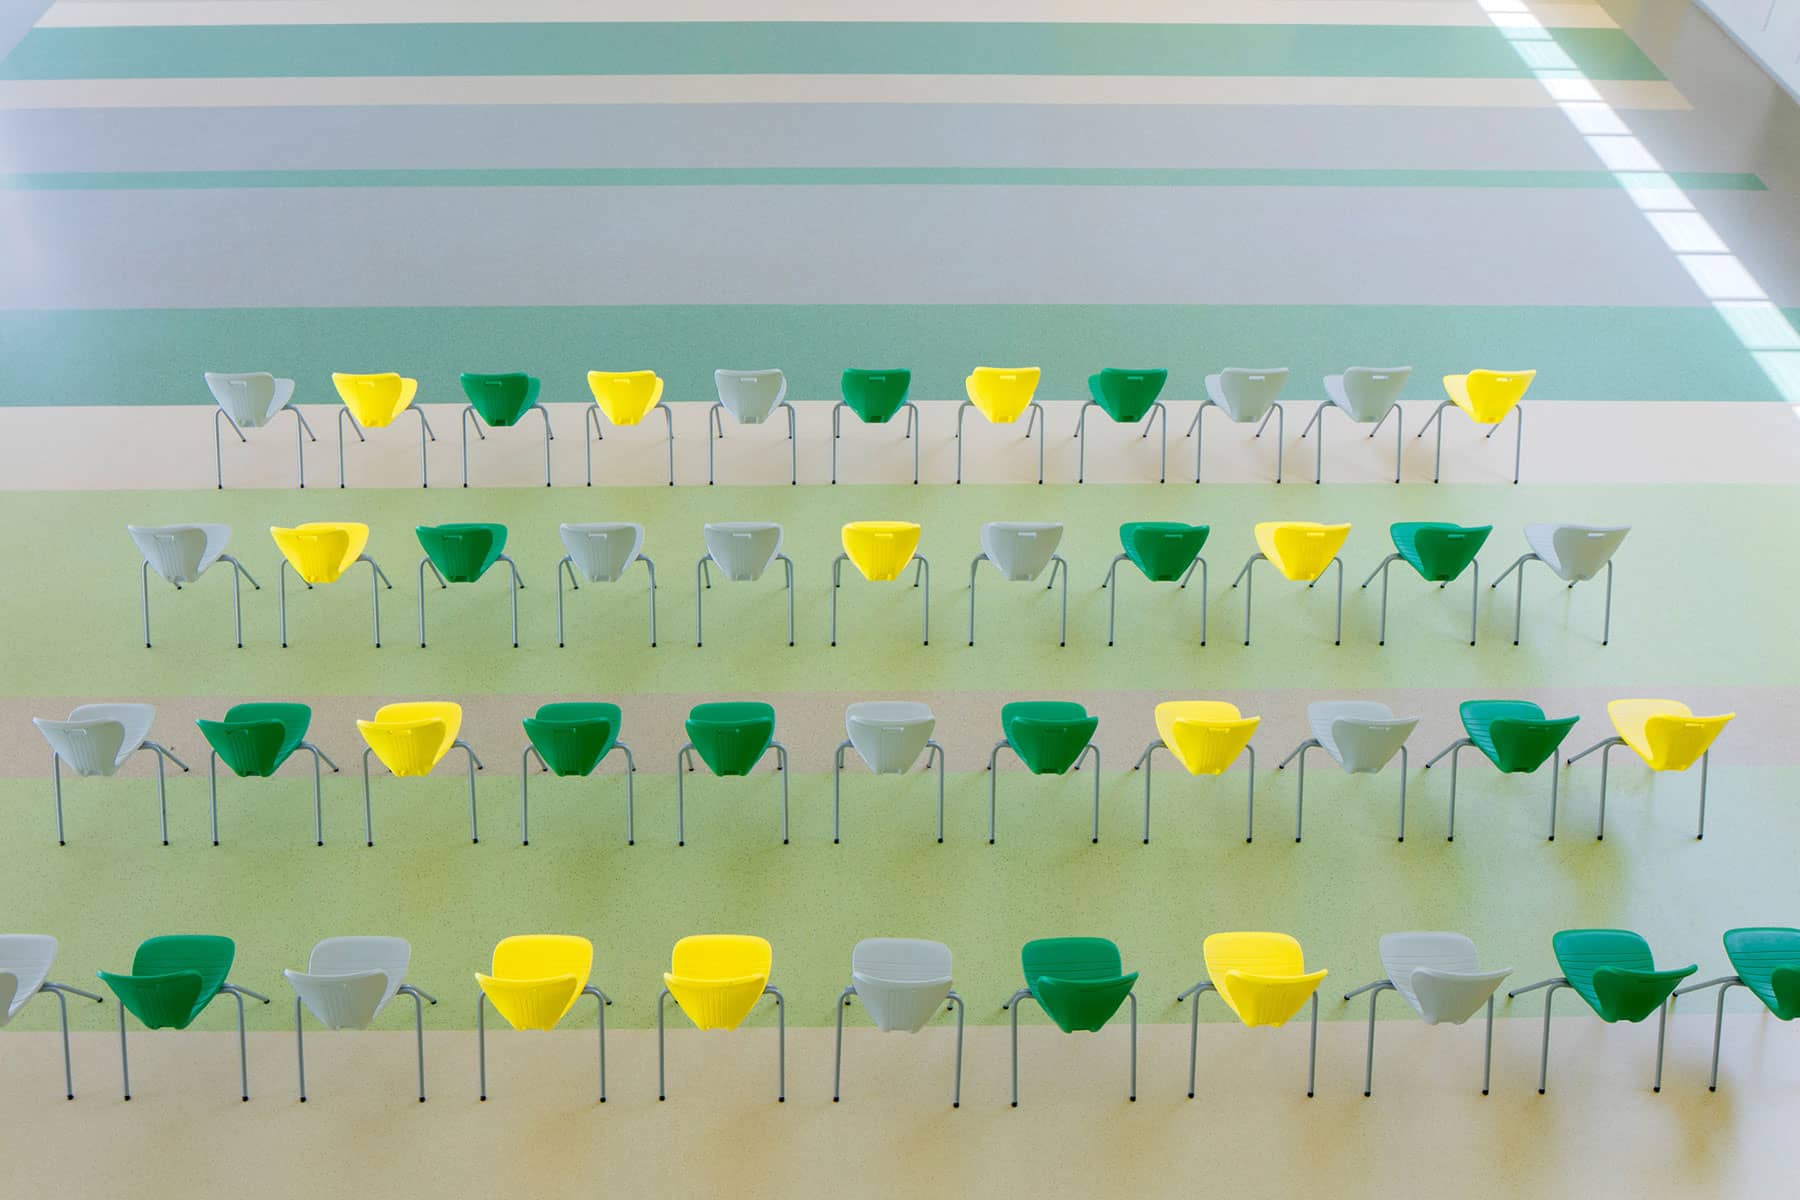 Architecture Photography: It's no coincidence that the chairs are perfectly aligned.